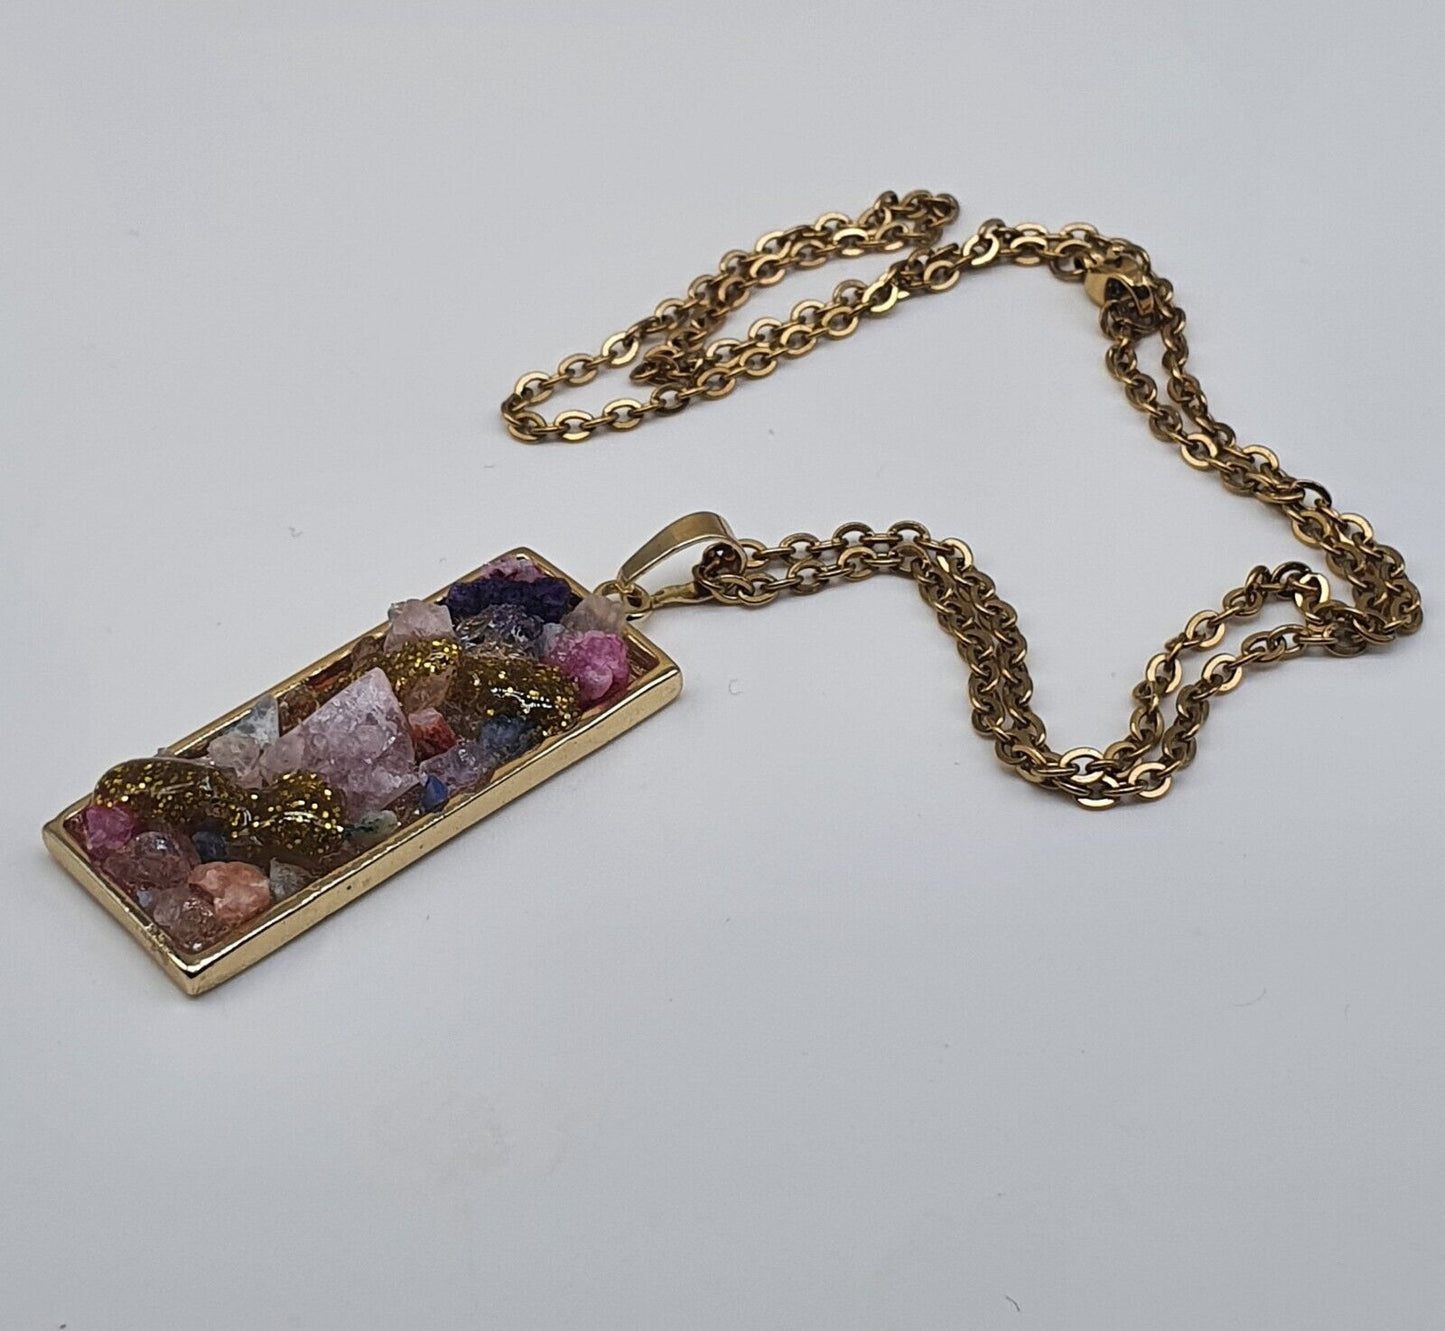 Raw Agate Druzy Quartz Pendant Gold Plated Stainless Steel Chain Necklace